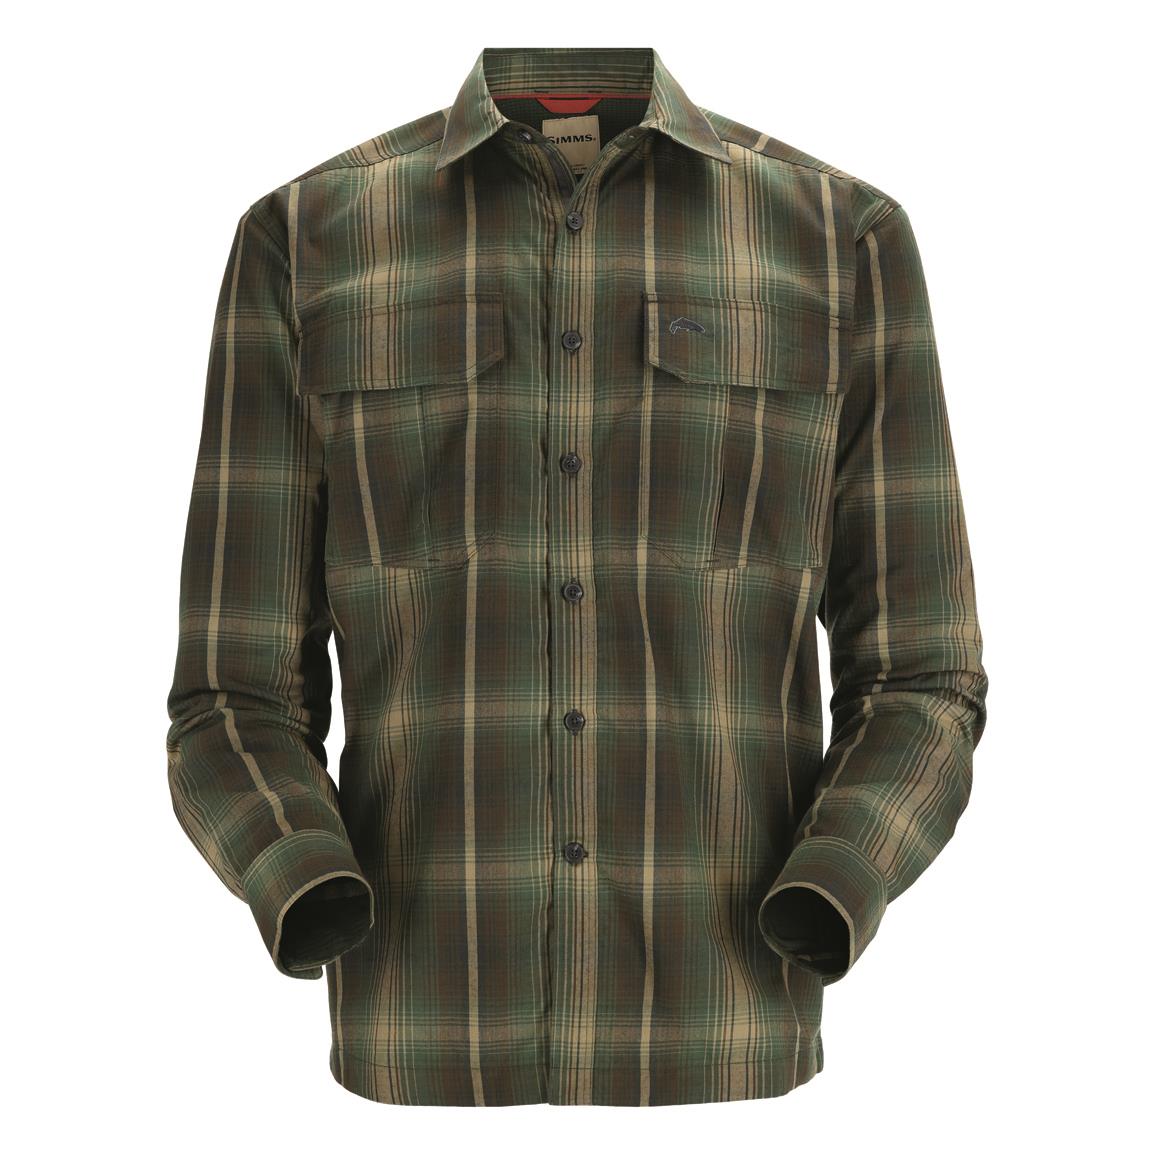 Simms Men's ColdWeather Fleece-lined Shirt, Forest Hickory Plaid